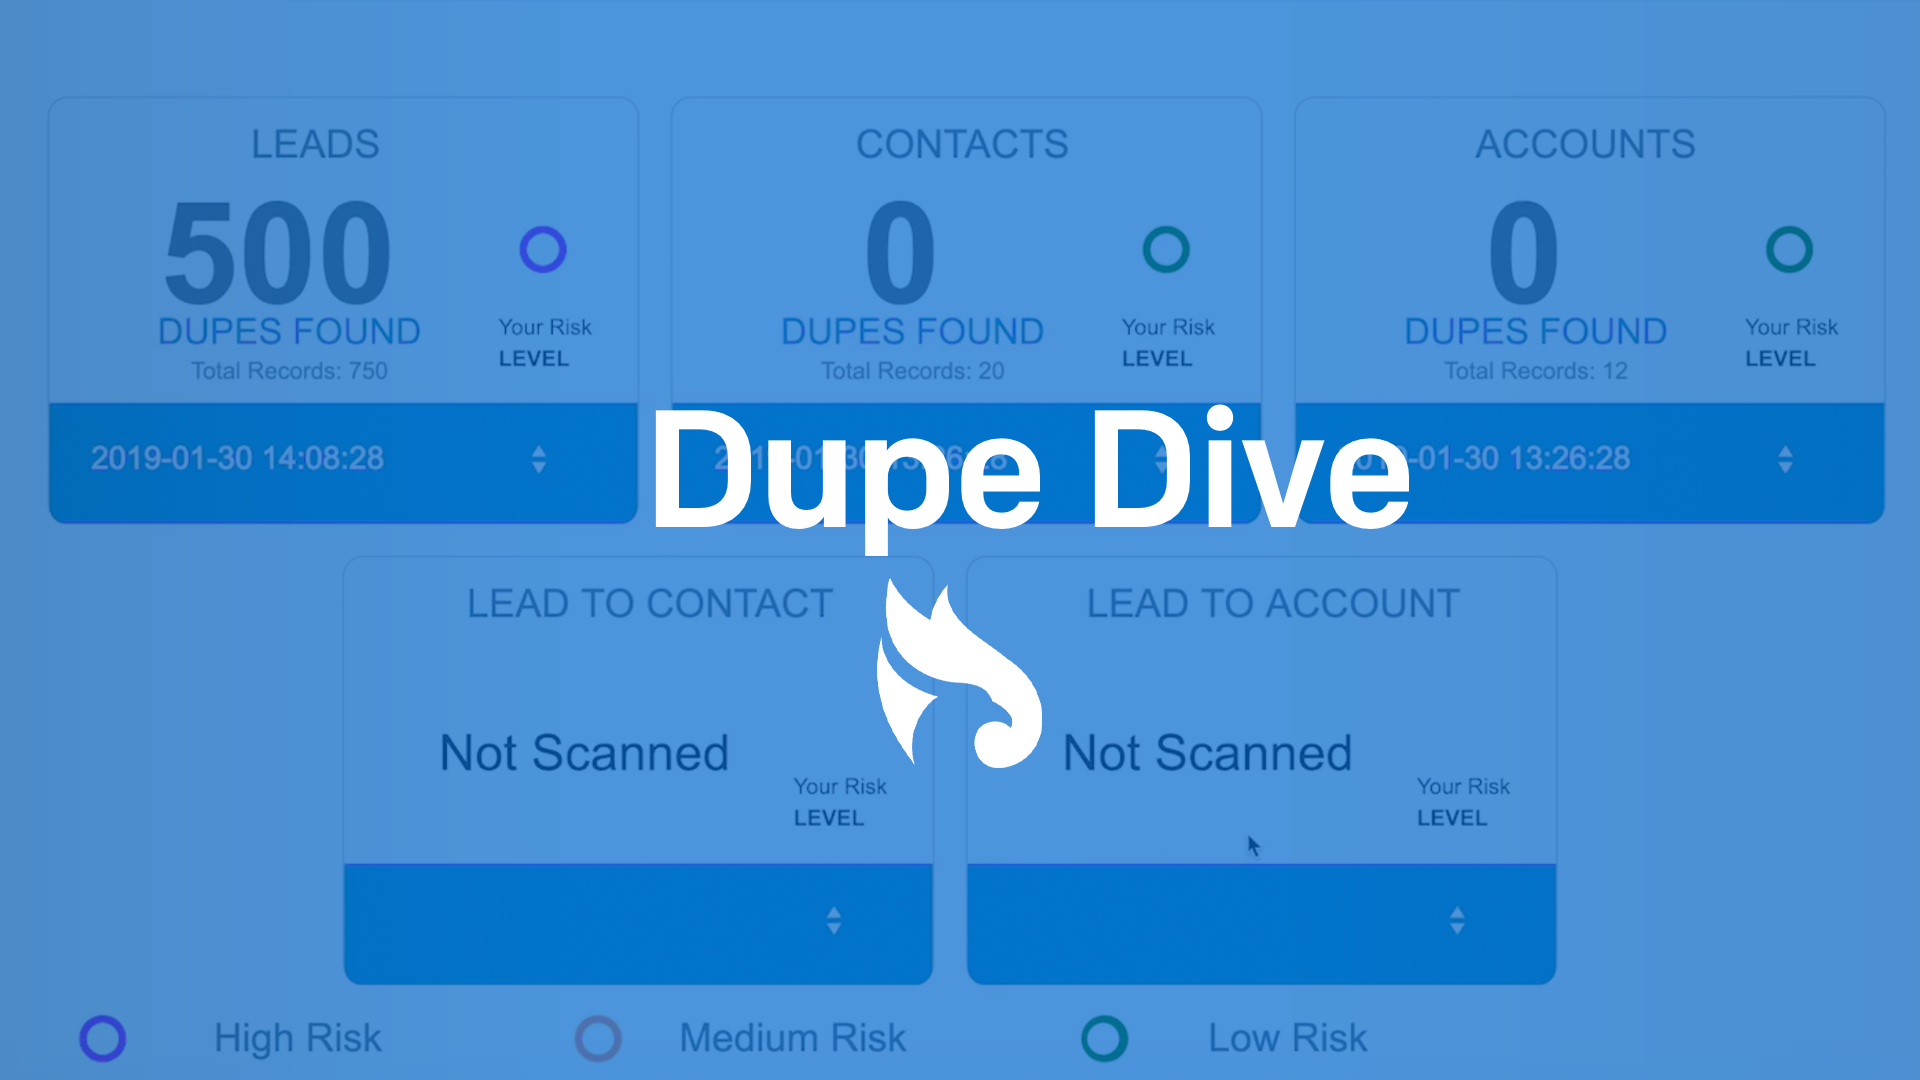 Dupe Dive Overview